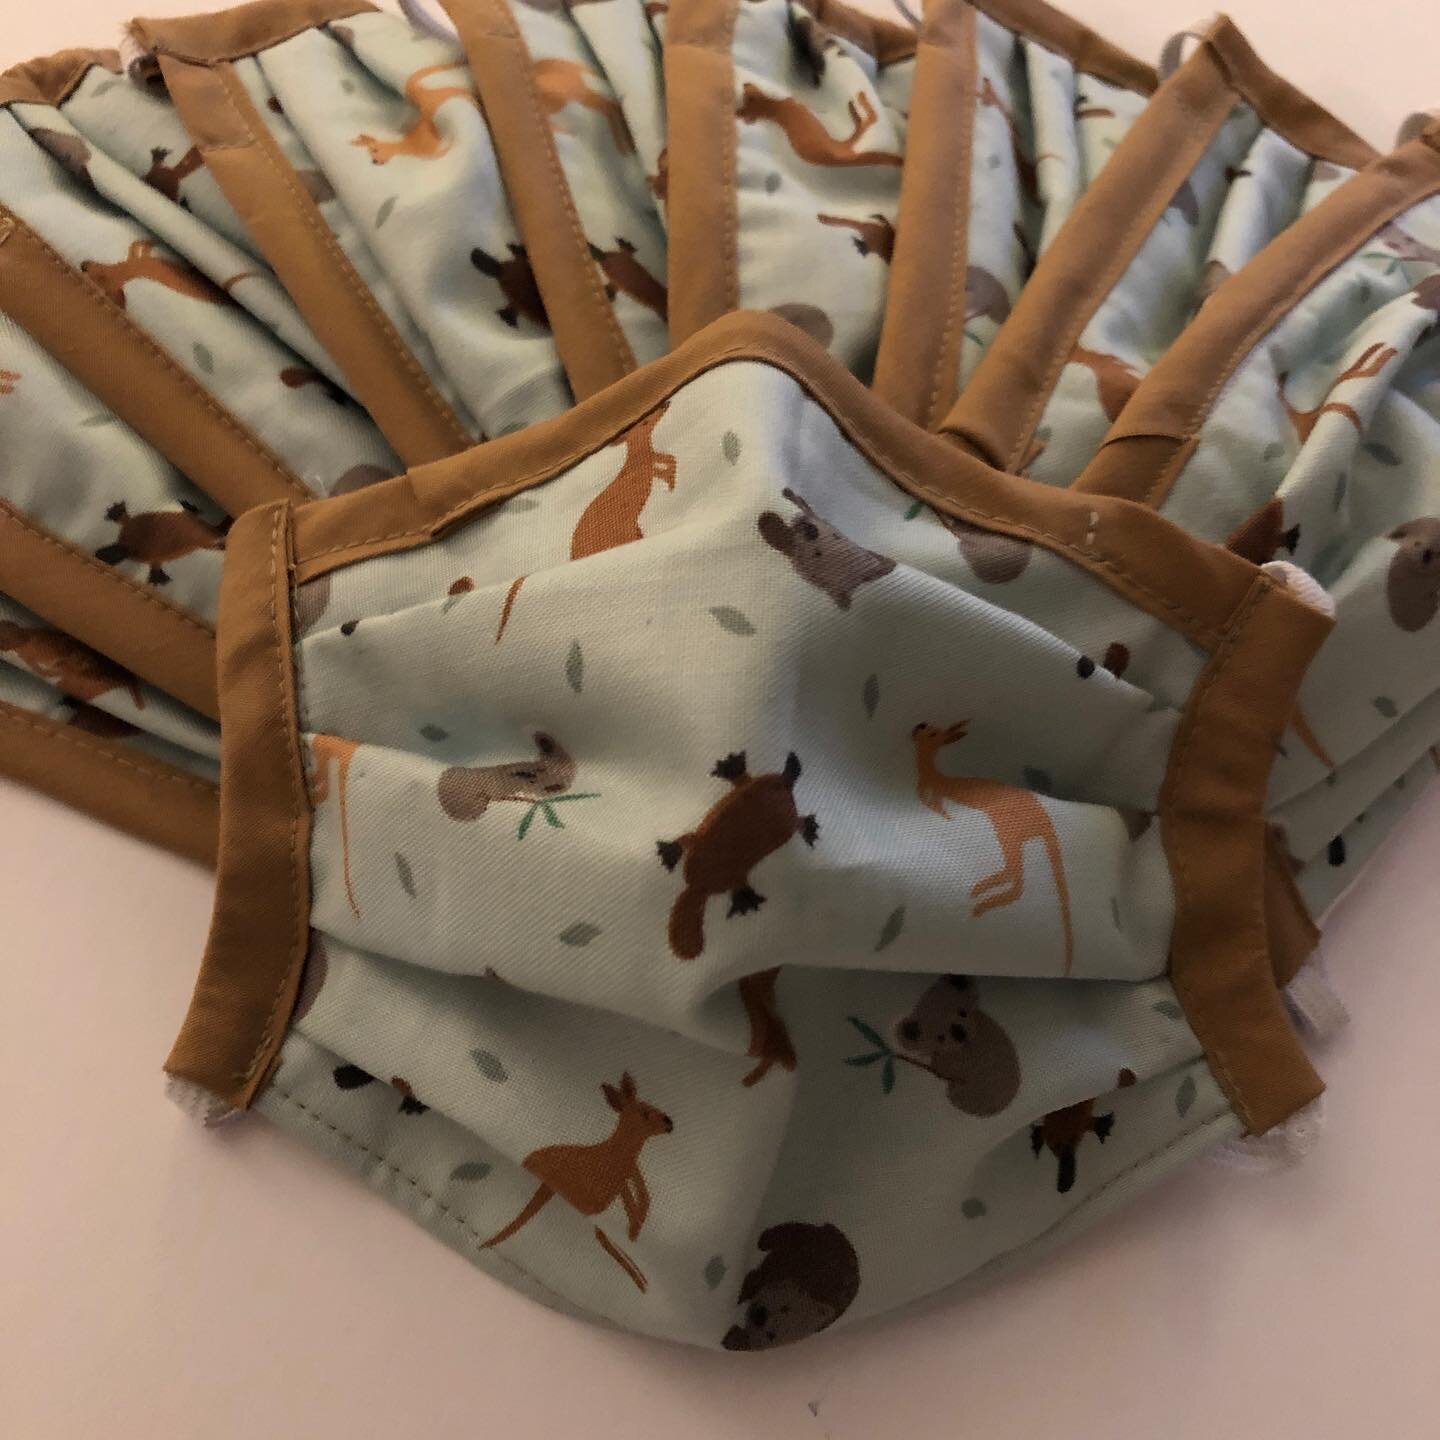 Feeling the Aussie vibes this evening getting the next batch of cuddle masks ready to be delivered to a local primary school tomorrow 🦘 🐨 
.
.
#facecoveringsforkids #protectthekids #protecttheteachers #keepkidssafe #protectthevulnerable #covid_19 #